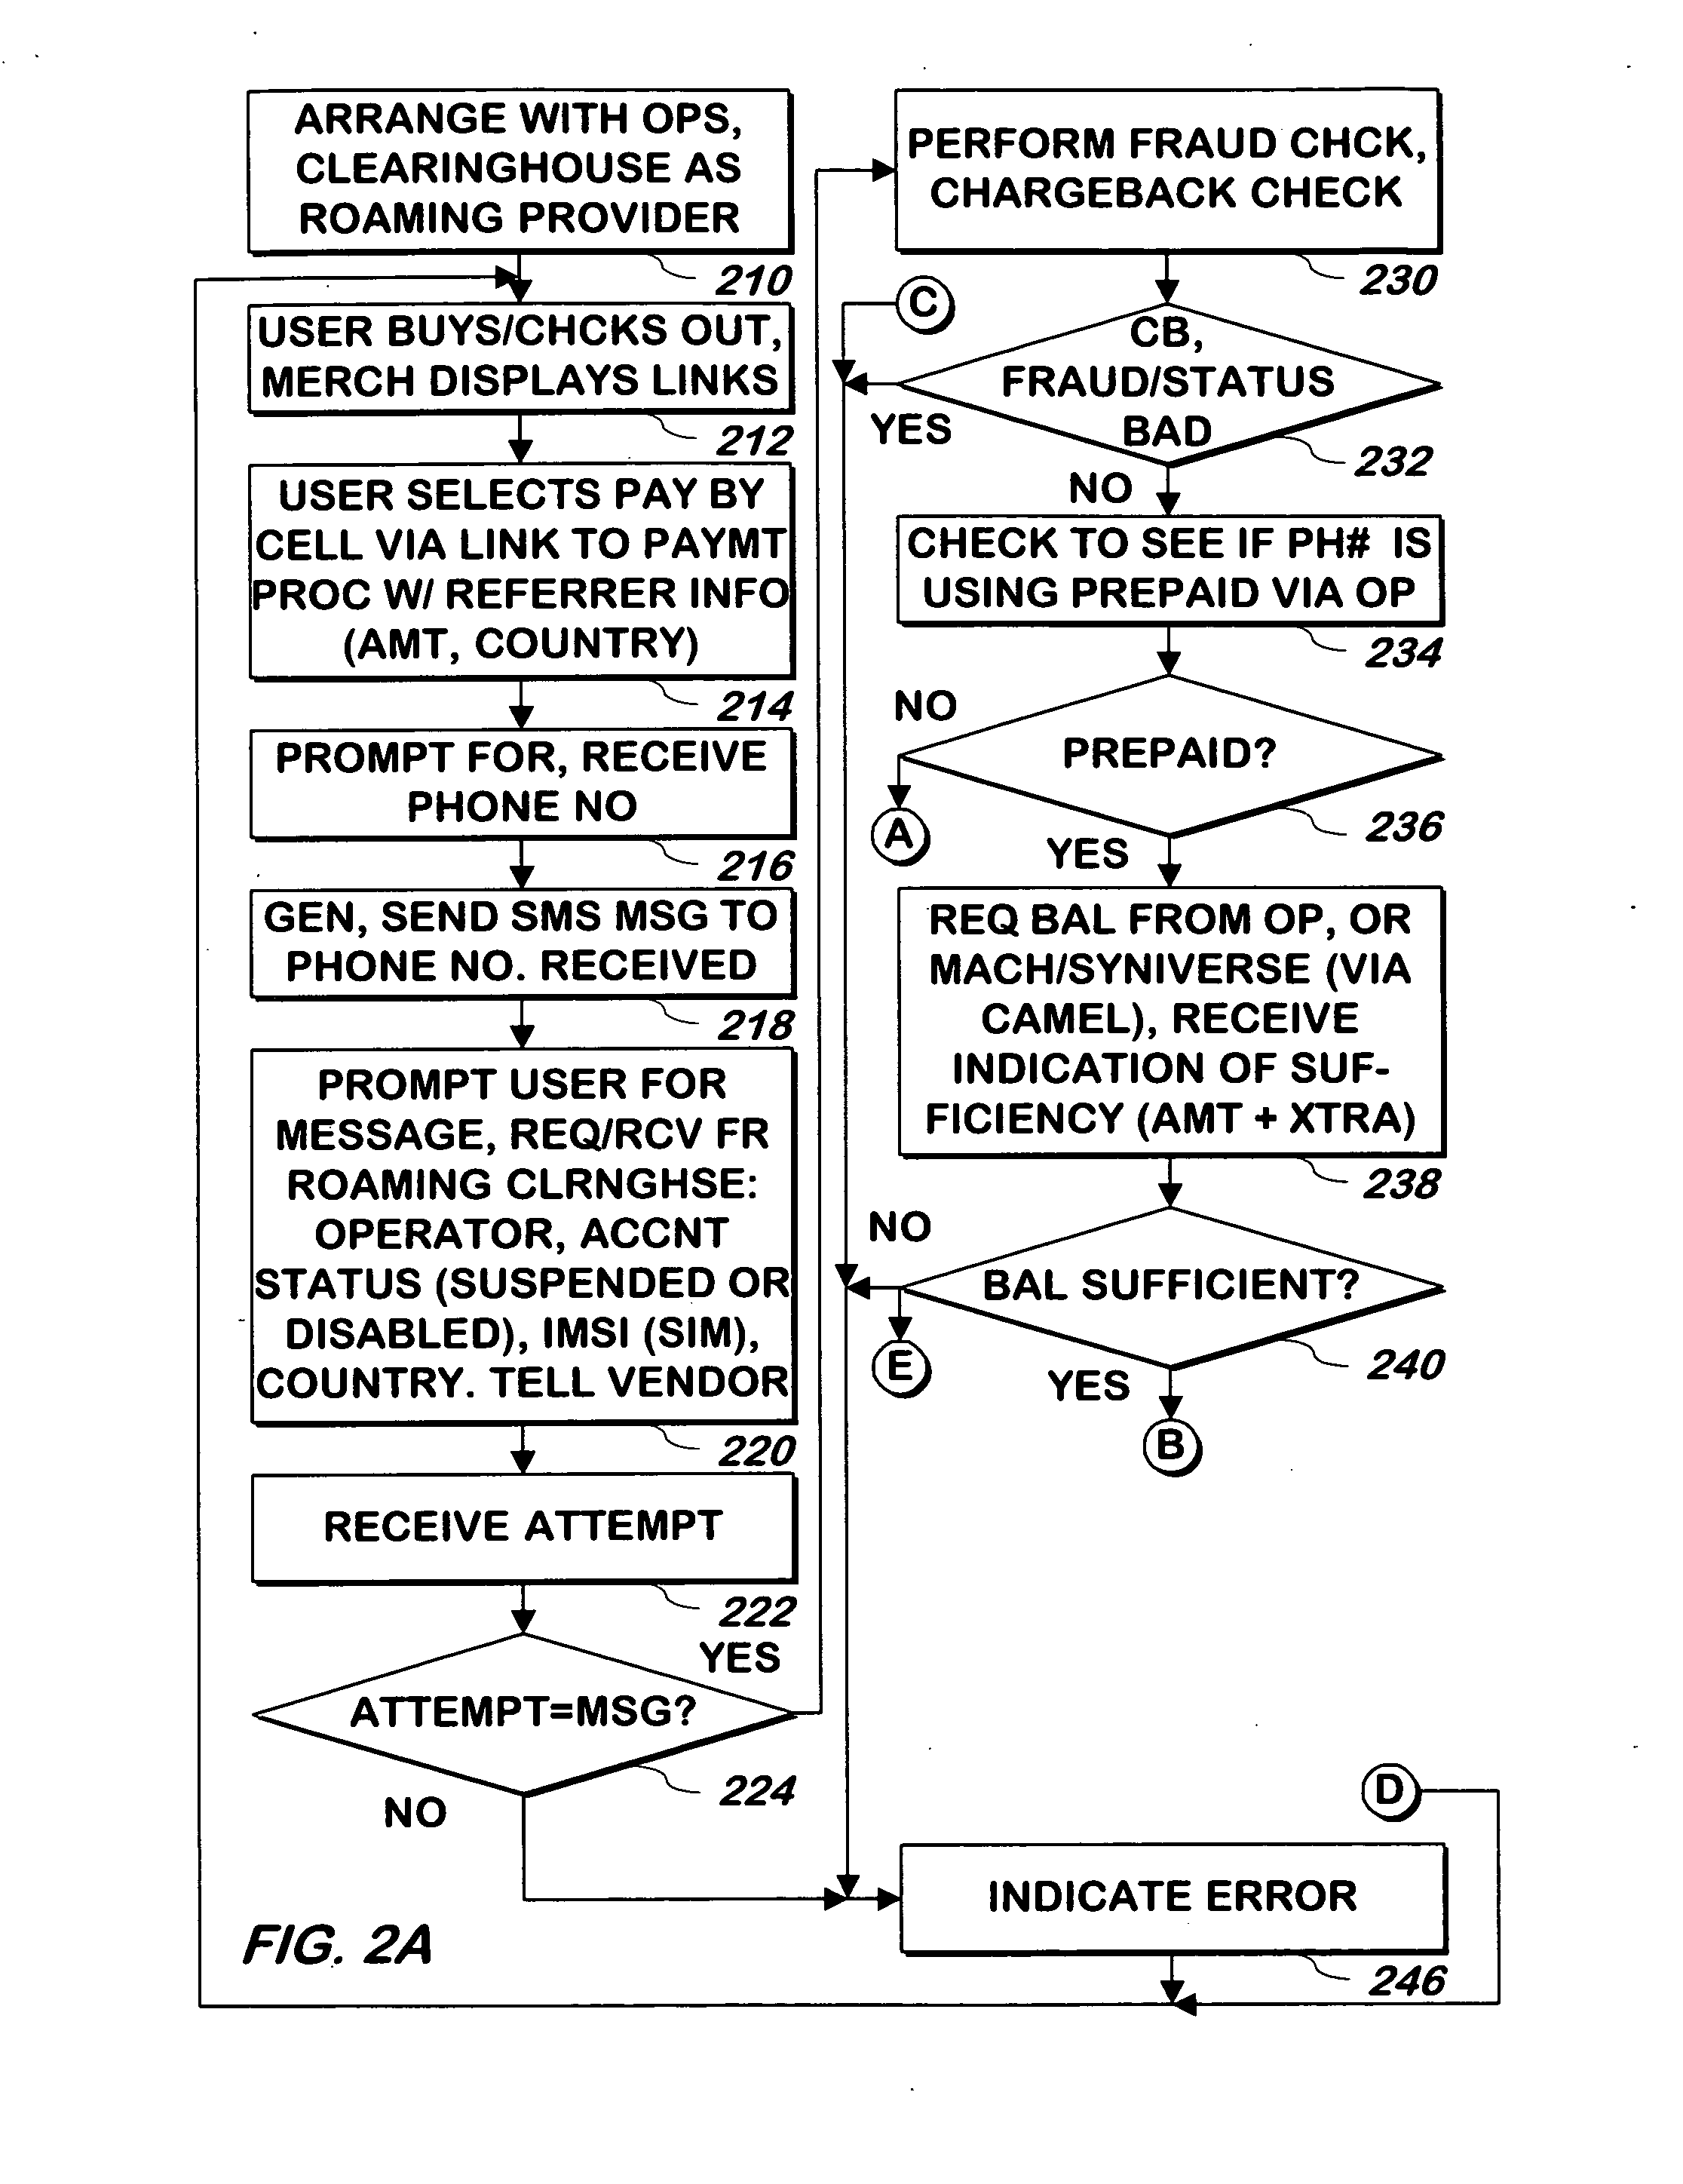 System and method for paying a merchant by a registered user using a cellular telephone account